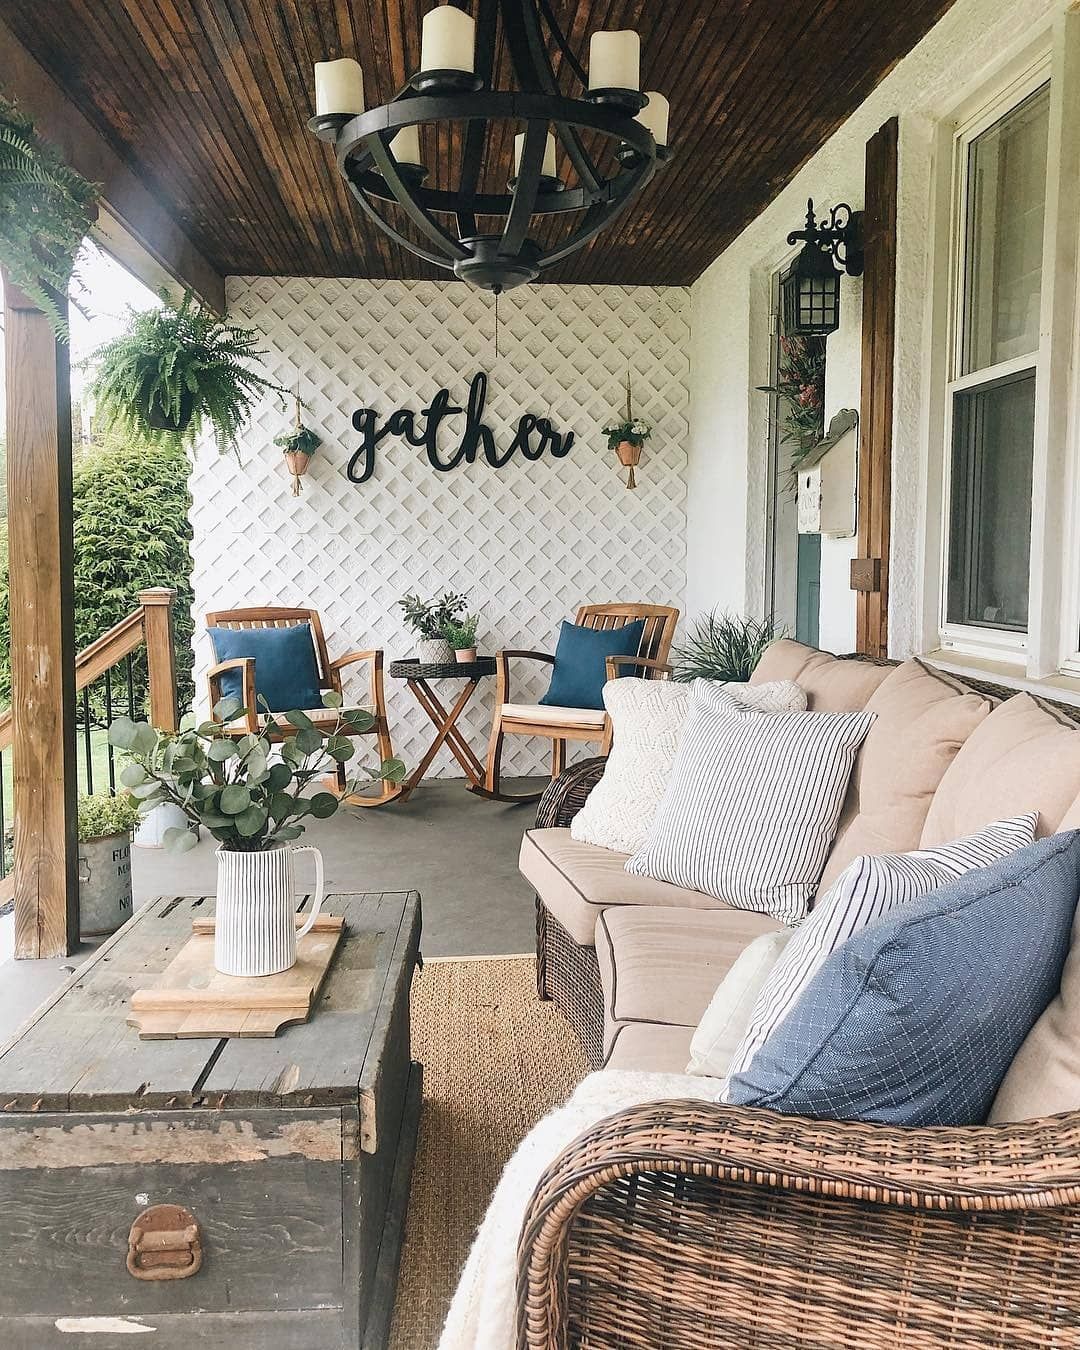 Stylish and Creative Back Porch Design Ideas for Your Outdoor Space